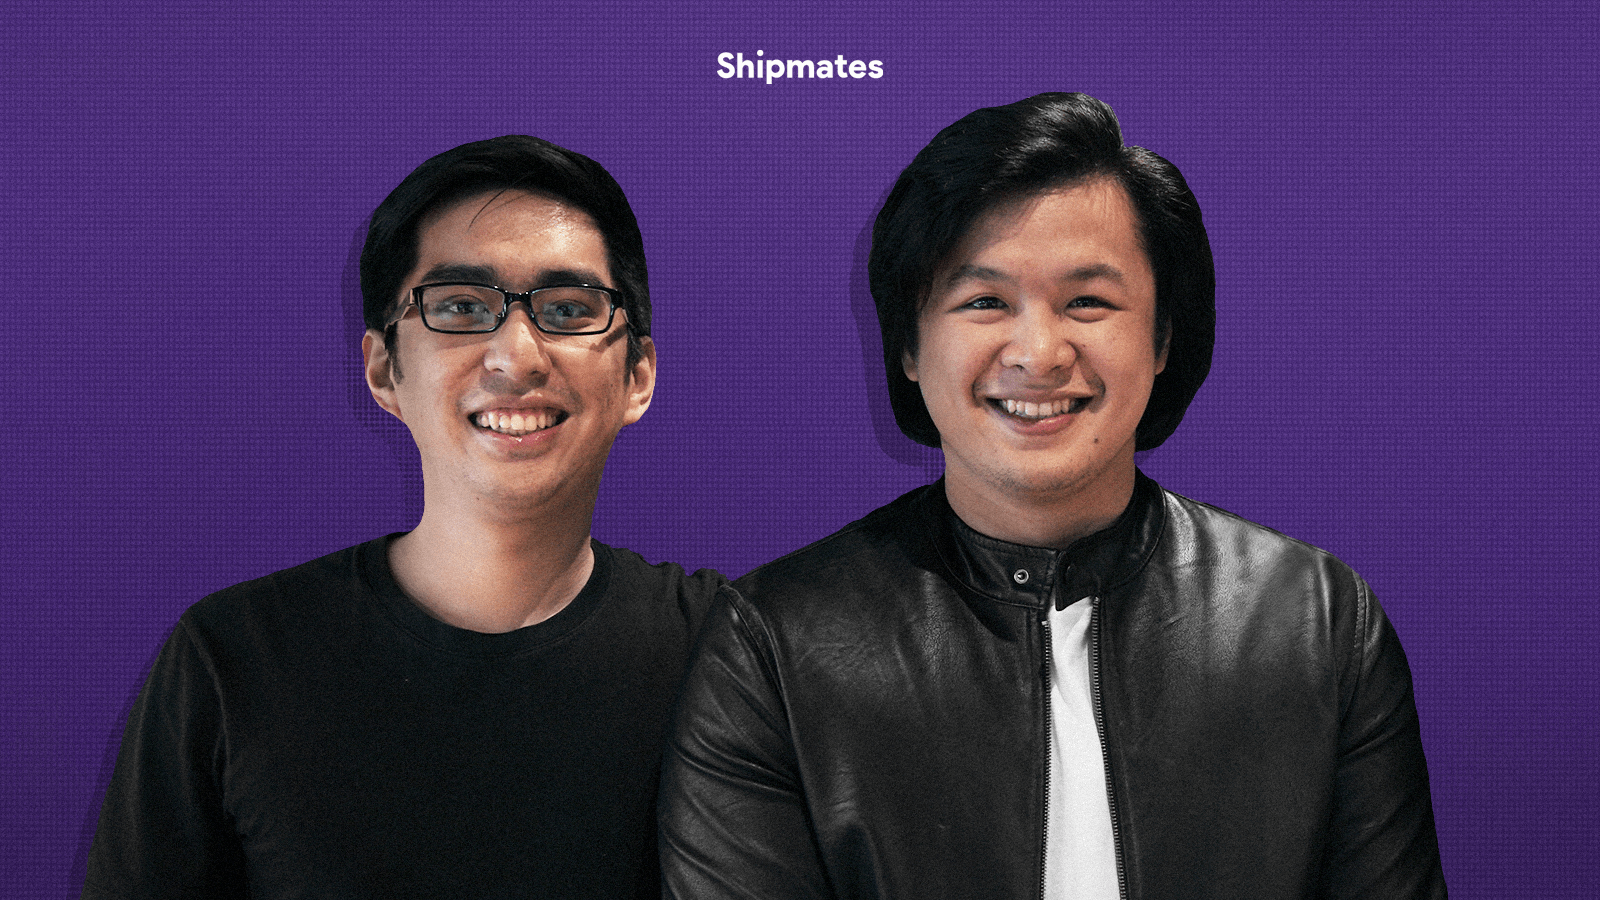 Shipmates raises $2,200,000 (PHP 125,000,000) in seed funding